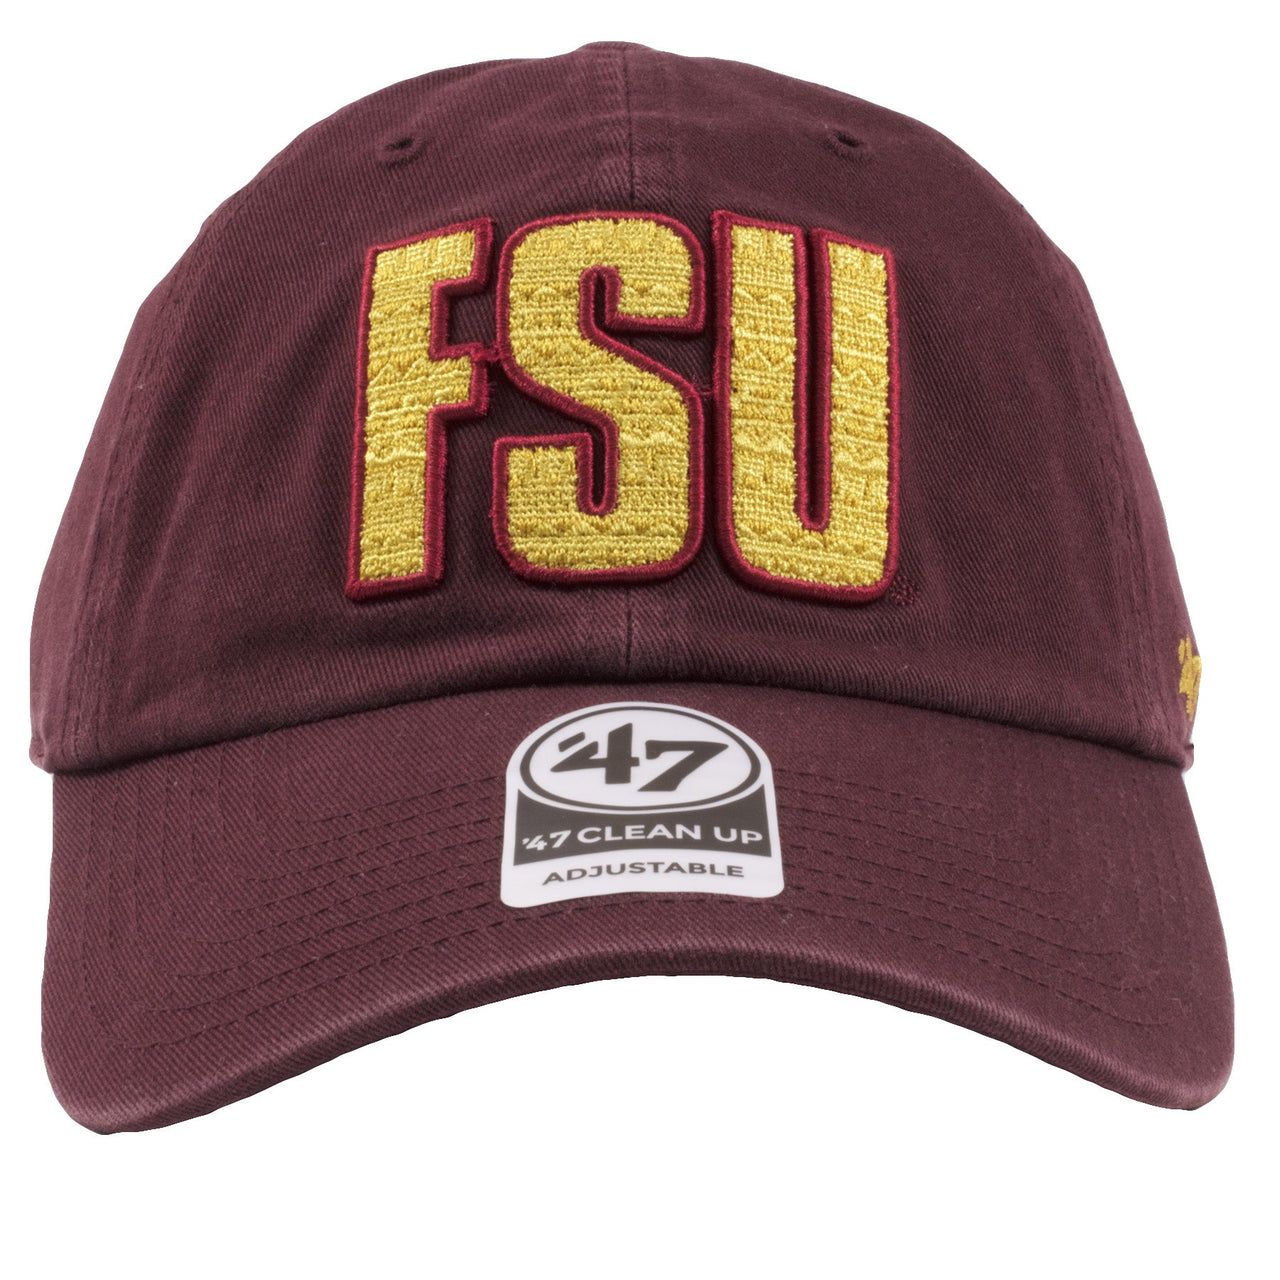 embroidered on the front of the Florida State University dad hat is the FSU logo in gold and burgundy